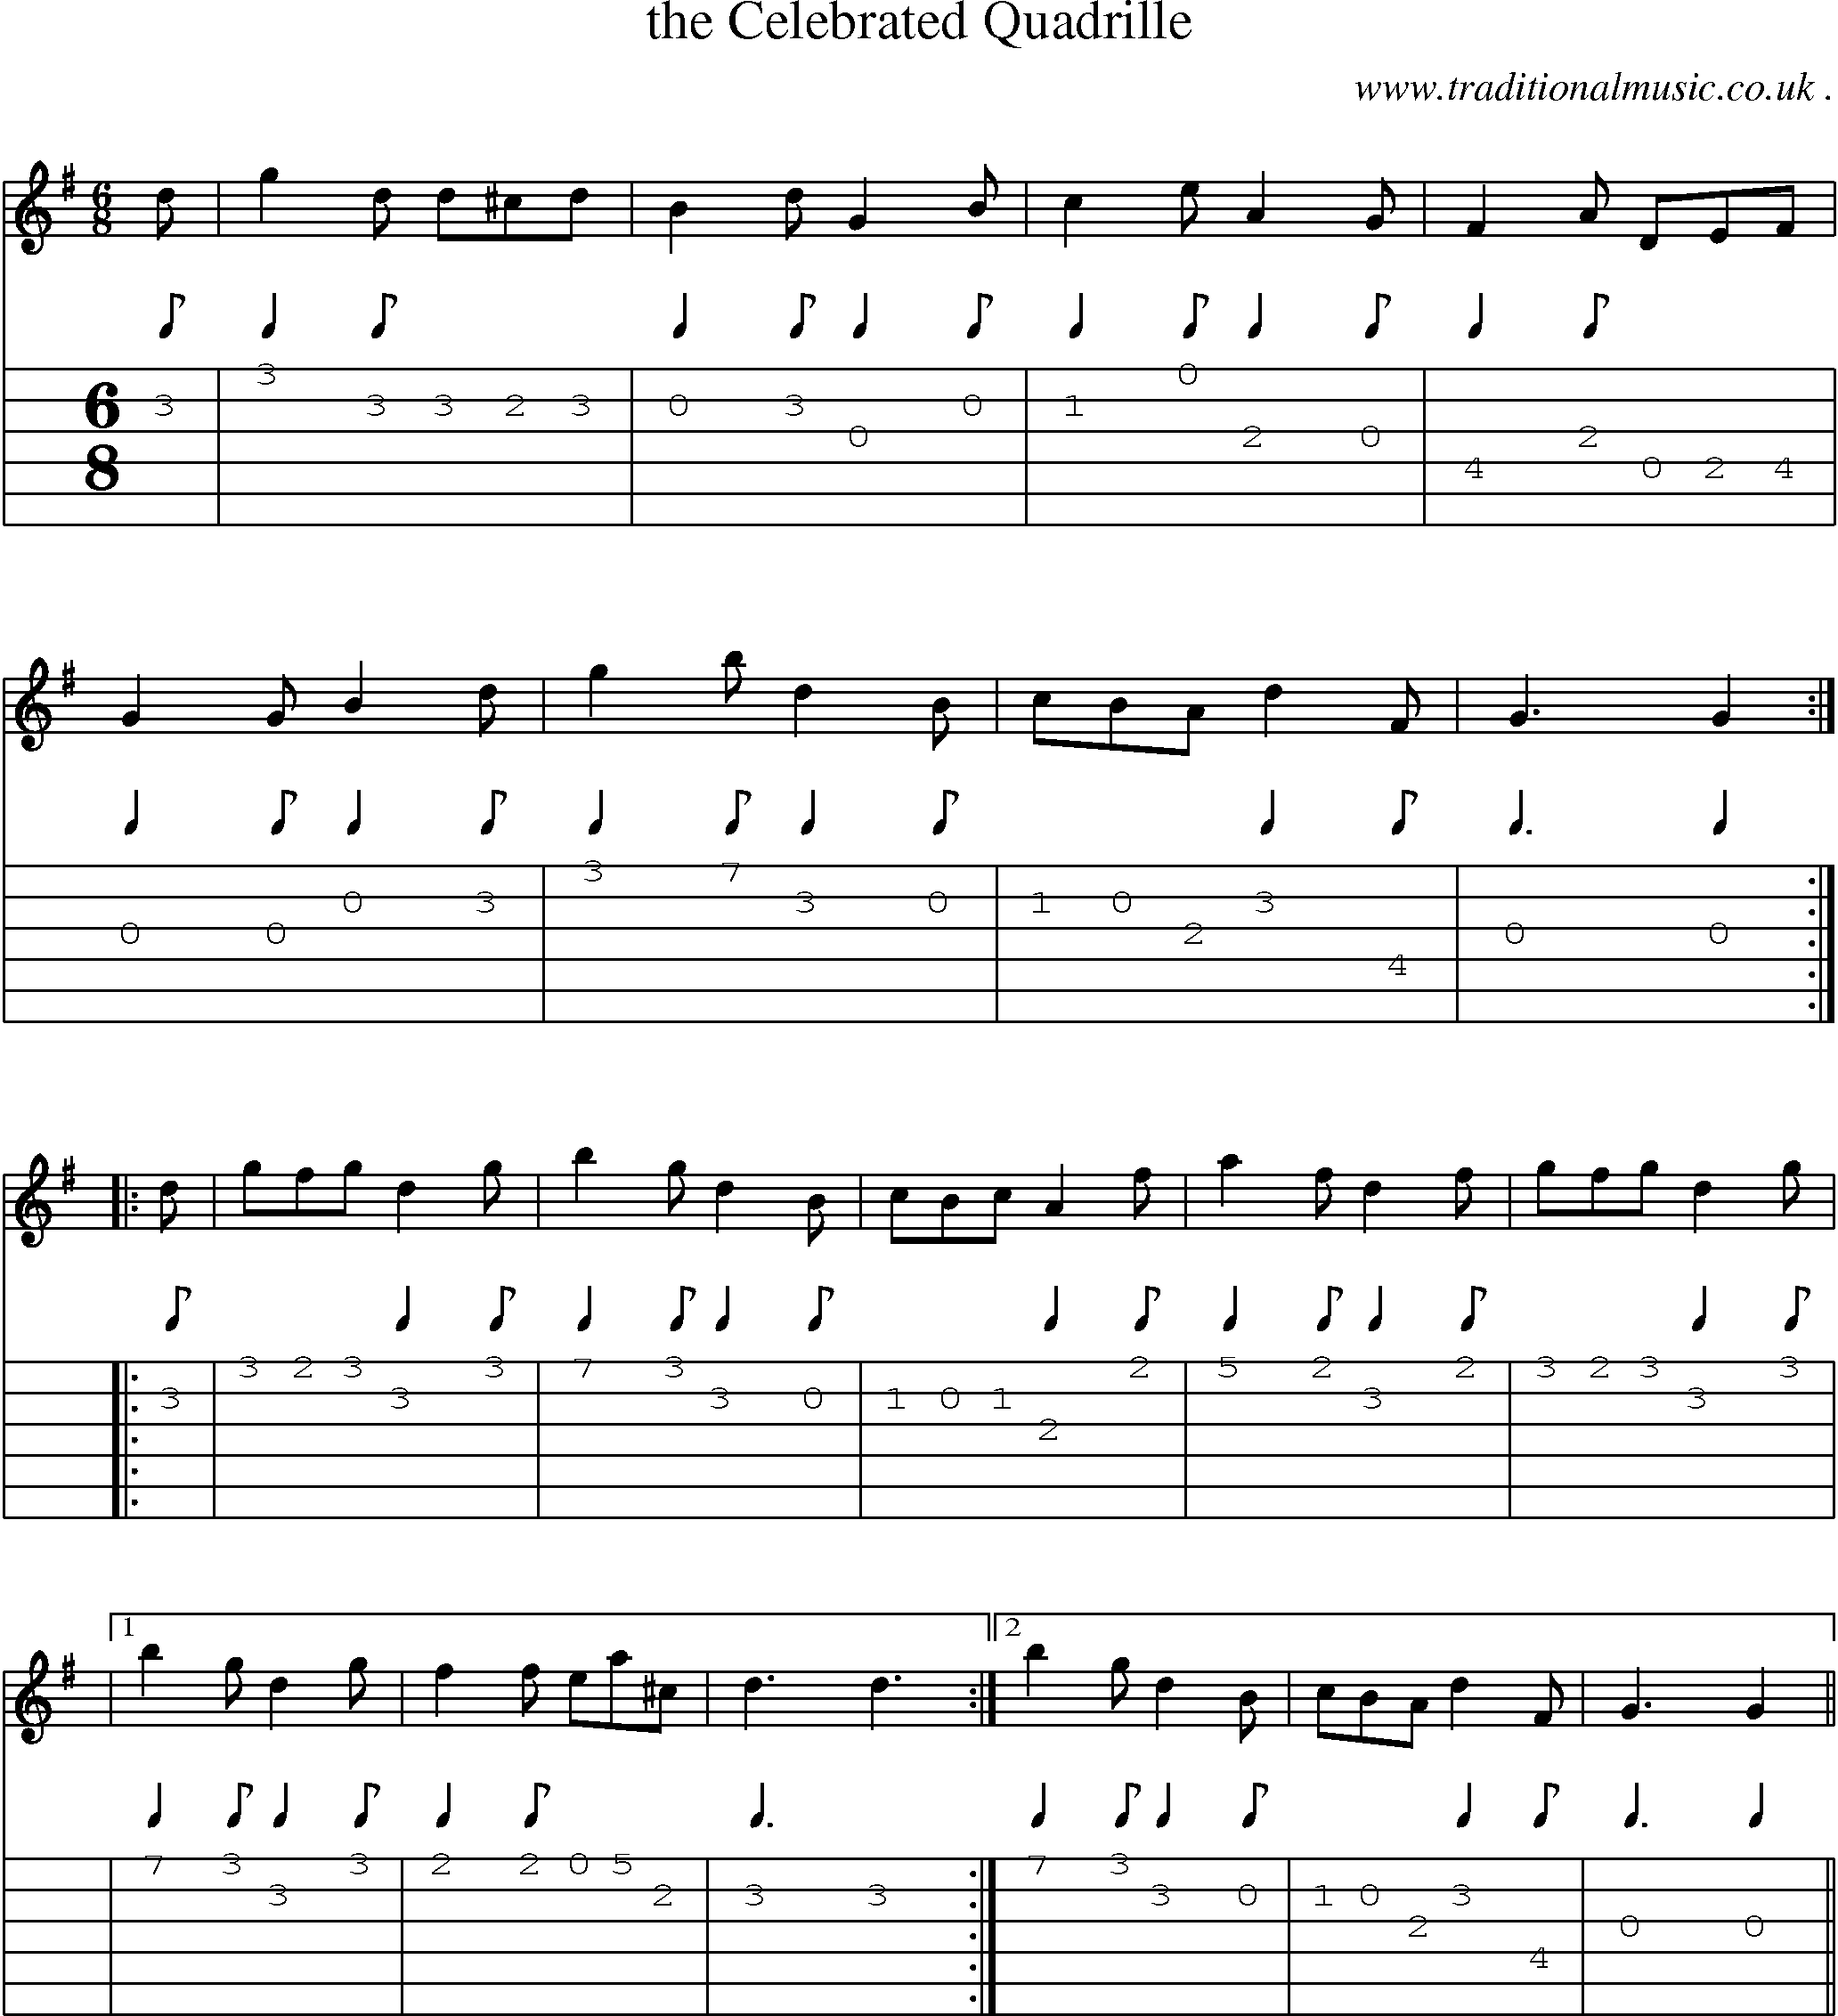 Sheet-Music and Guitar Tabs for The Celebrated Quadrille